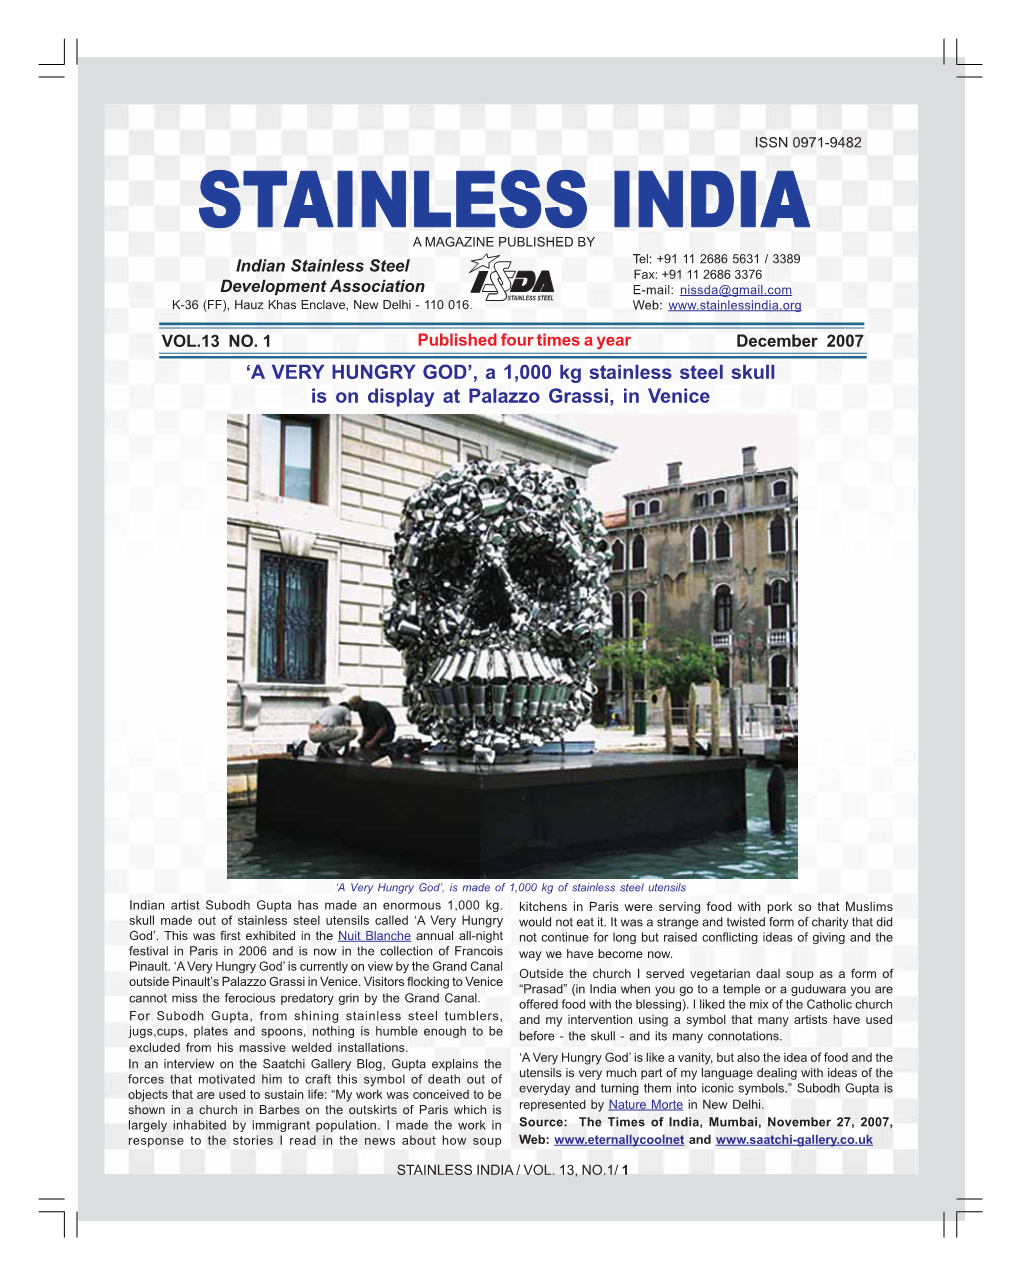 A VERY HUNGRY GOD’, a 1,000 Kg Stainless Steel Skull Is on Display at Palazzo Grassi, in Venice